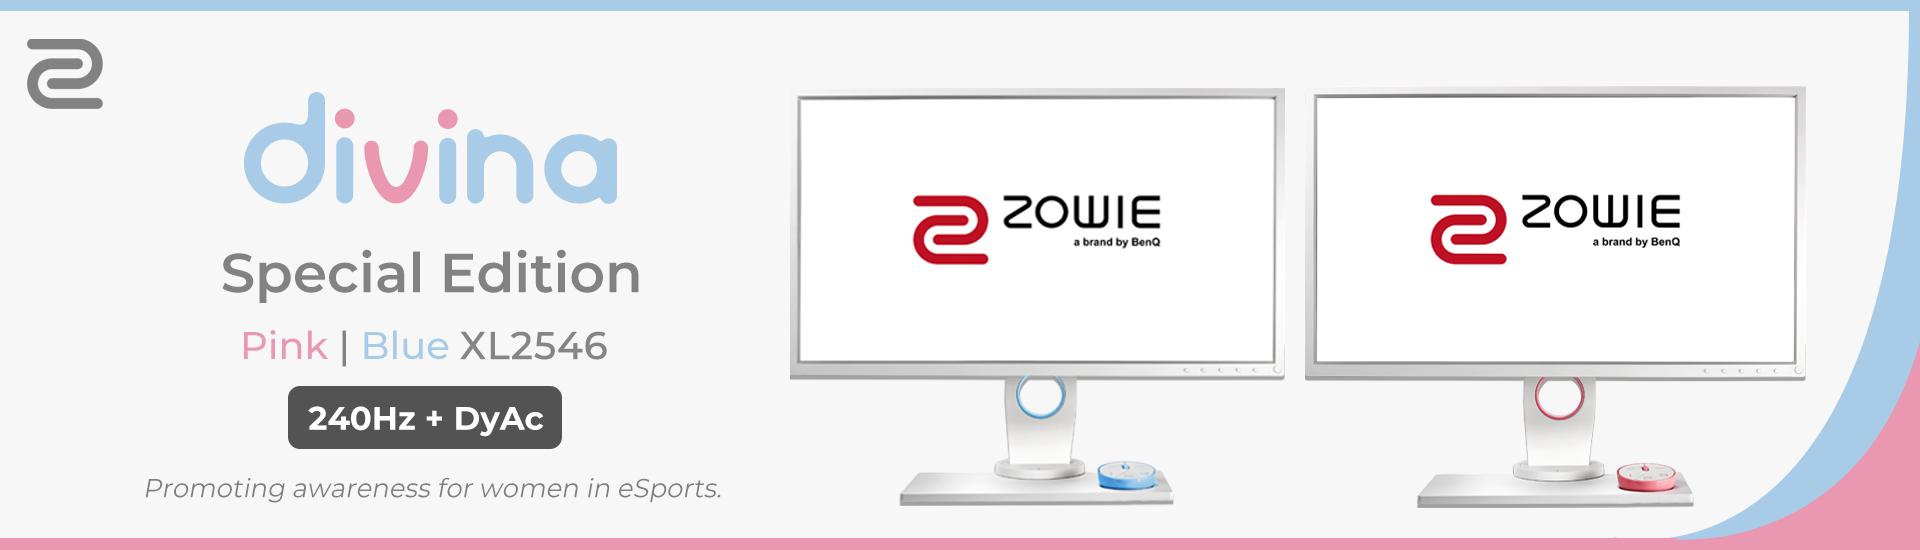 Zowie Benq America In Continuing Our Effort To Promote Awareness Further The Discussion Of Women In Esports The Xl2546 Divina Pink Blue 240hz Refresh Rate With Exclusive Dyac Technology Are